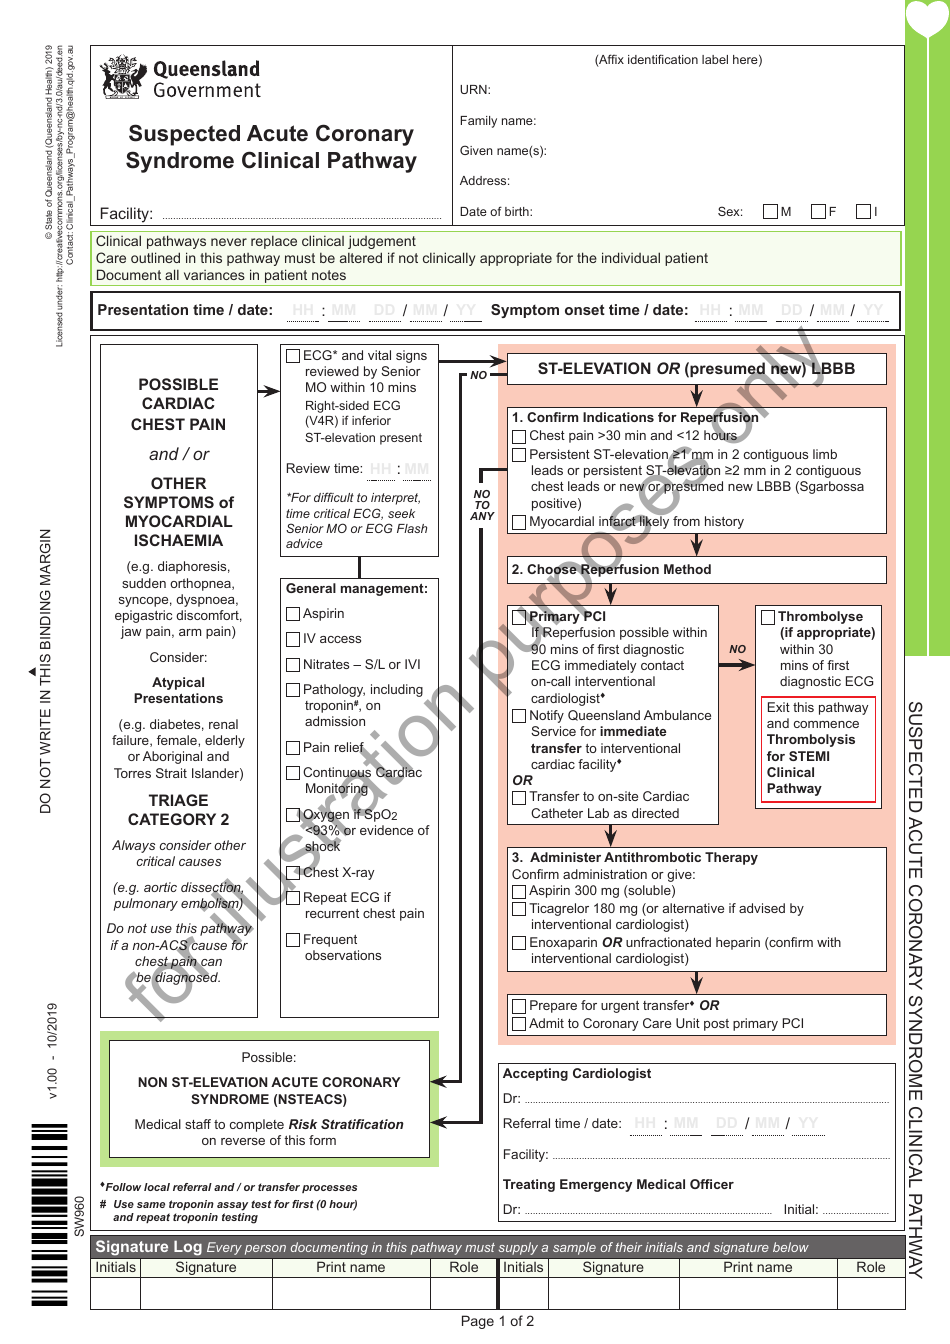 Suspected Acute Coronary Syndrome Clinical Pathway - Queensland, Australia, Page 1